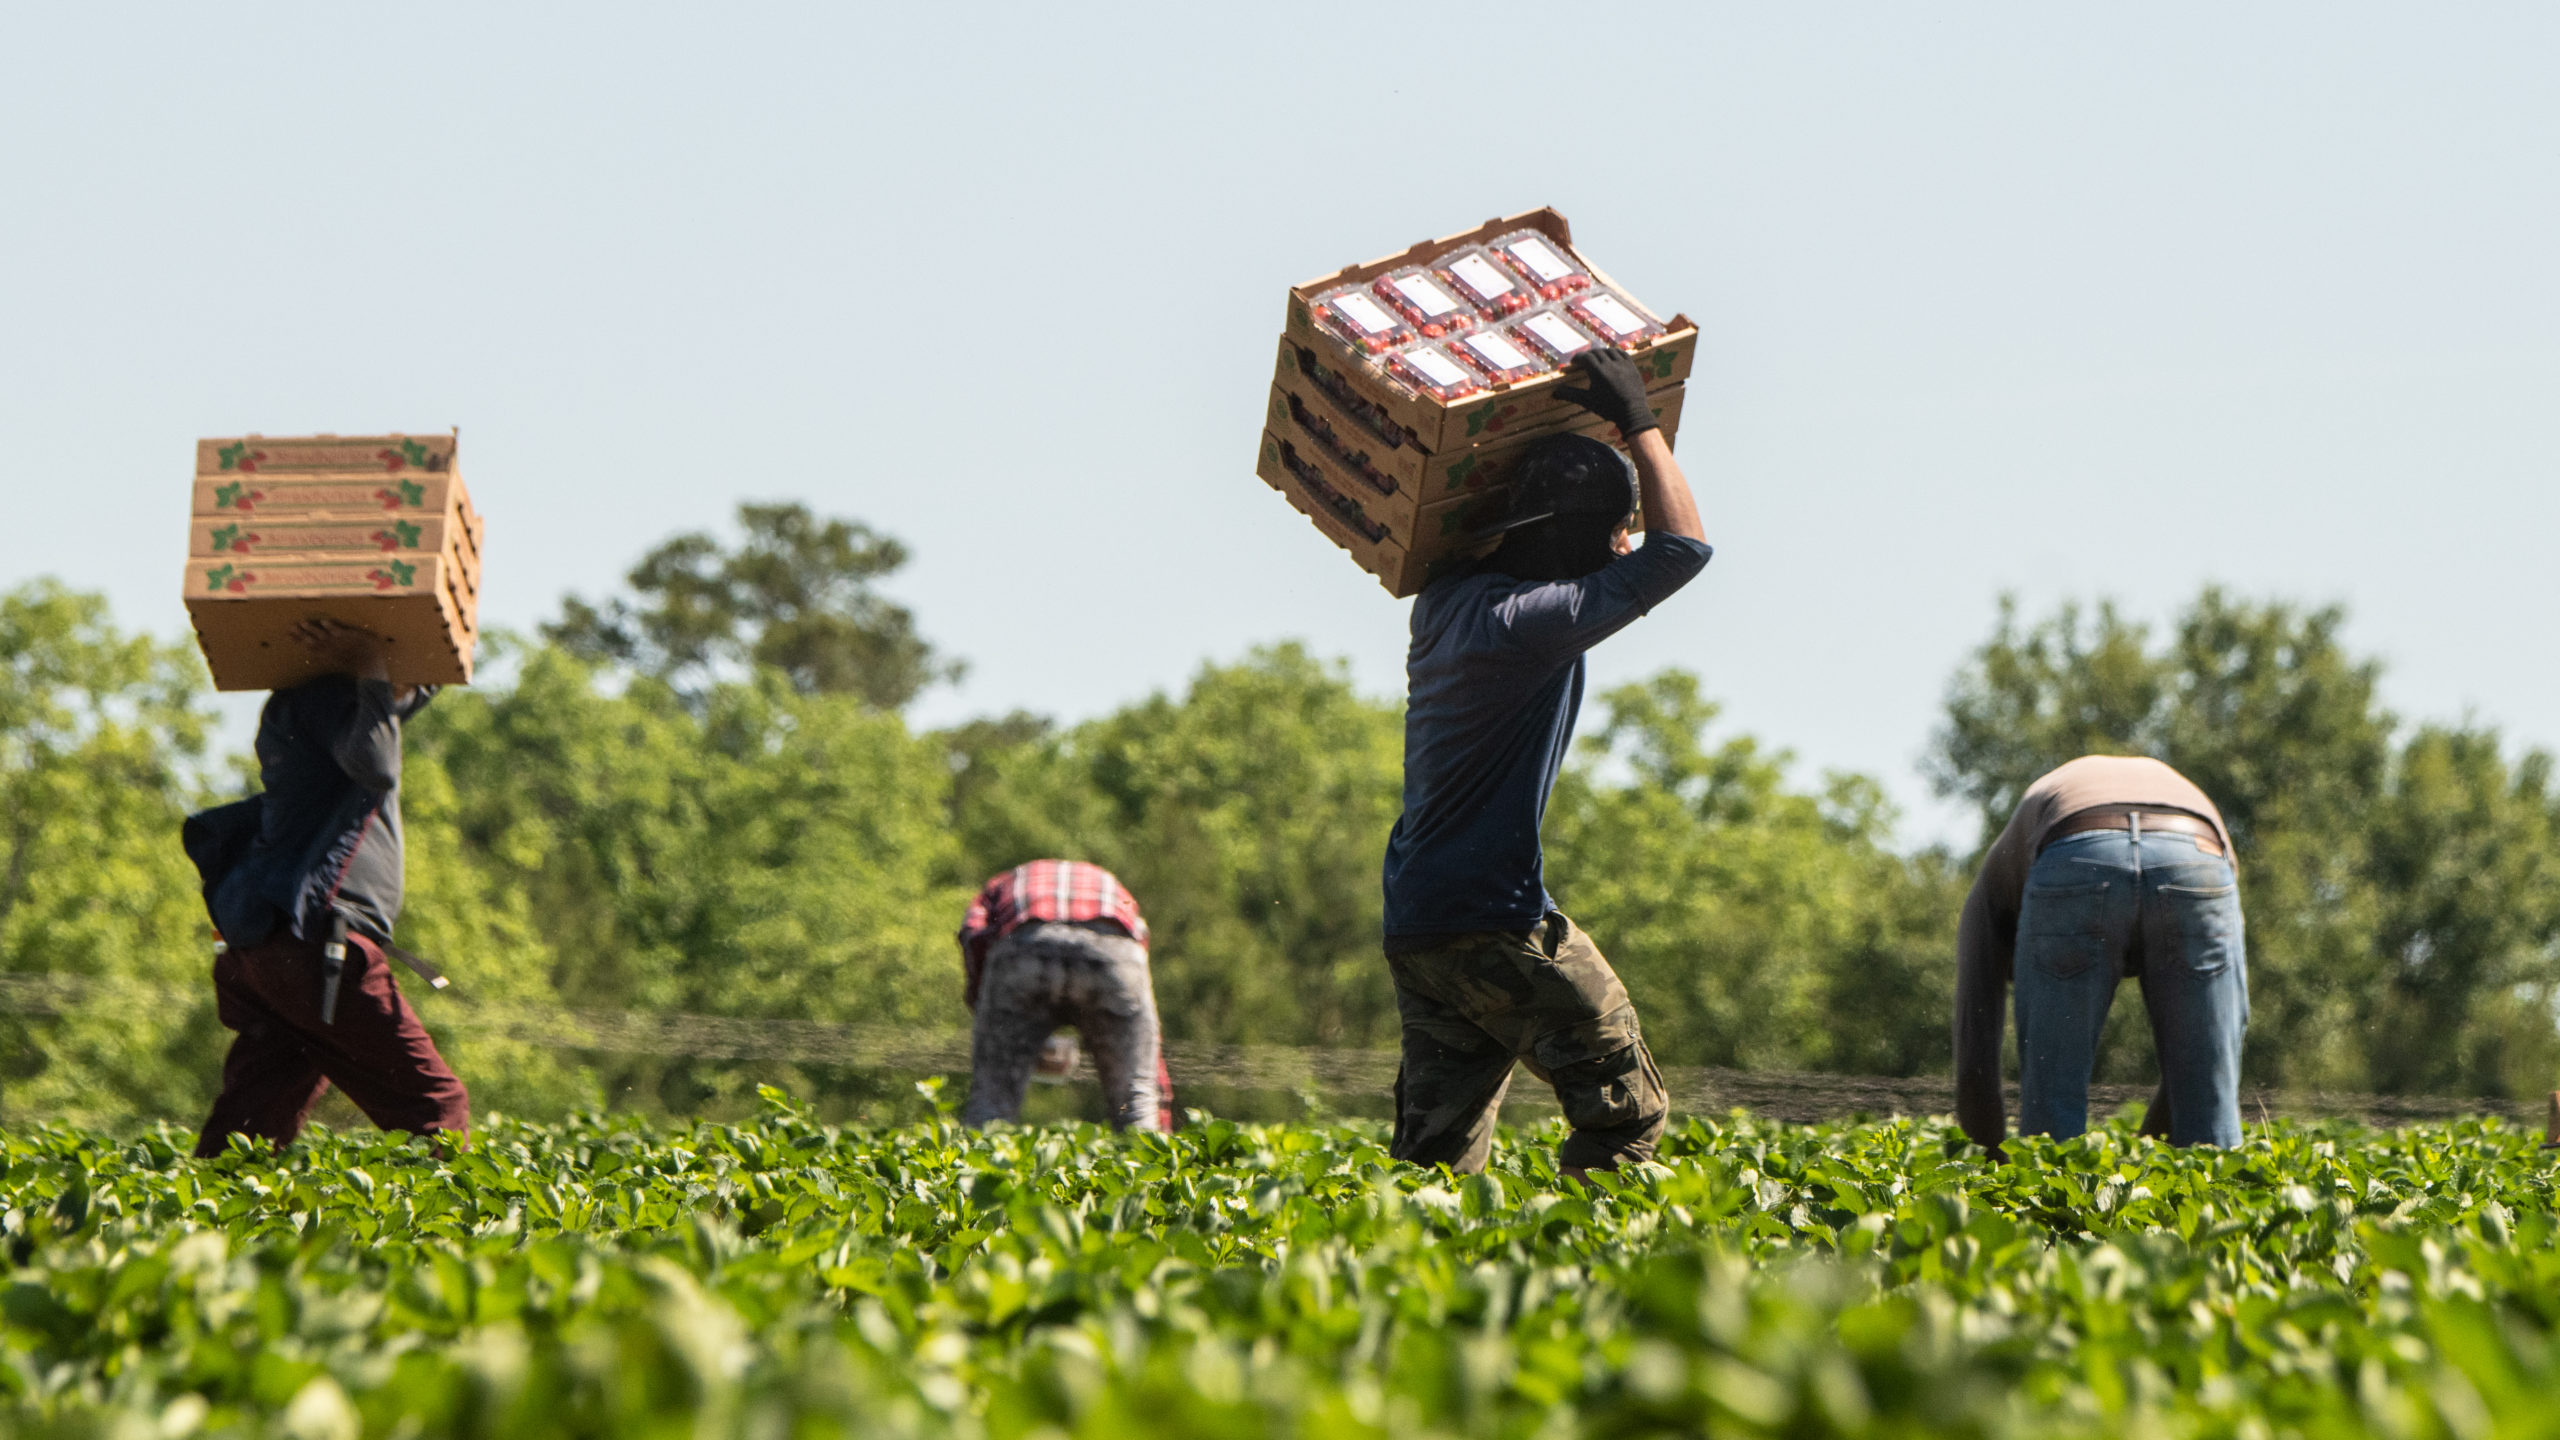 USDA photo of farmworkers by Lance Cheung.